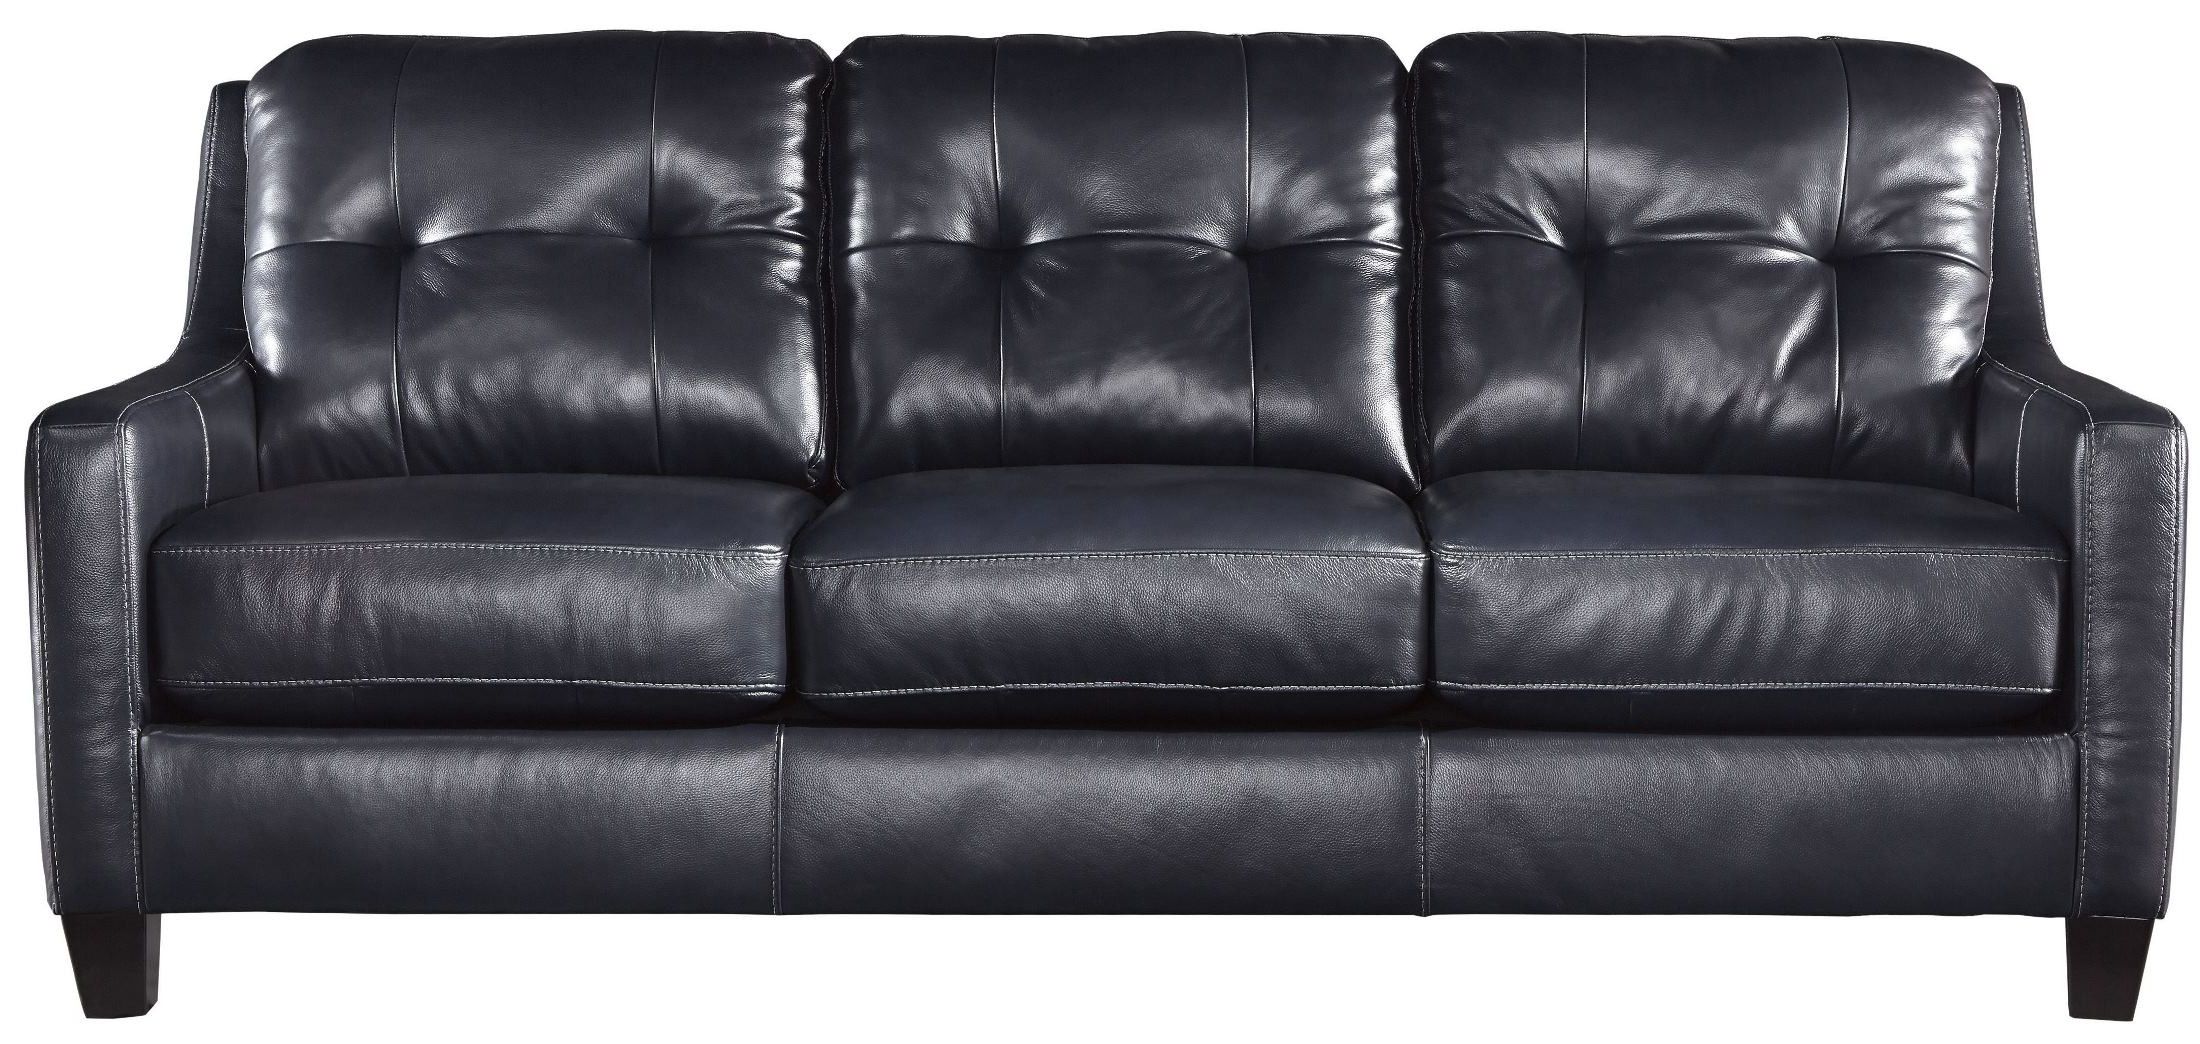 Coleman Furniture Intended For Navy Sleeper Sofa Couches (View 8 of 15)